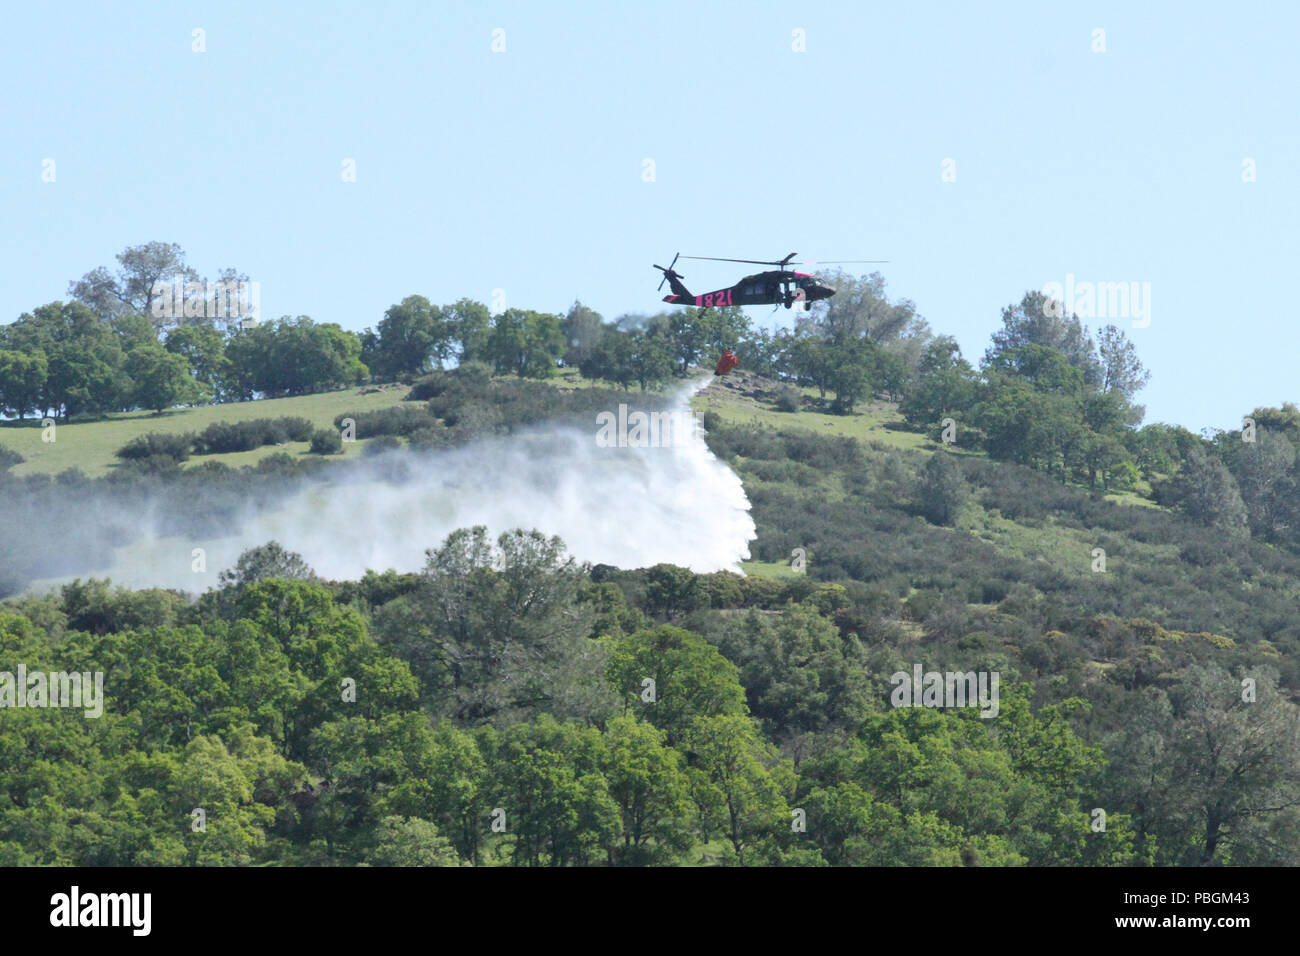 A UH-60 Black Hawk helicopter of the California Army National Guard drops water over a simulated wildfire April 14, 2018, near Lake Pardee in Ione, California, during an annual exercise between Cal Guard and the California Department of Forestry and Fire Protection (CAL FIRE). The organizations annually prep for wildfires in April, as the summer months lead to California’s toughest fire-fighting season. (U.S. Army National Guard photo by Staff Sgt. Eddie Siguenza) Stock Photo